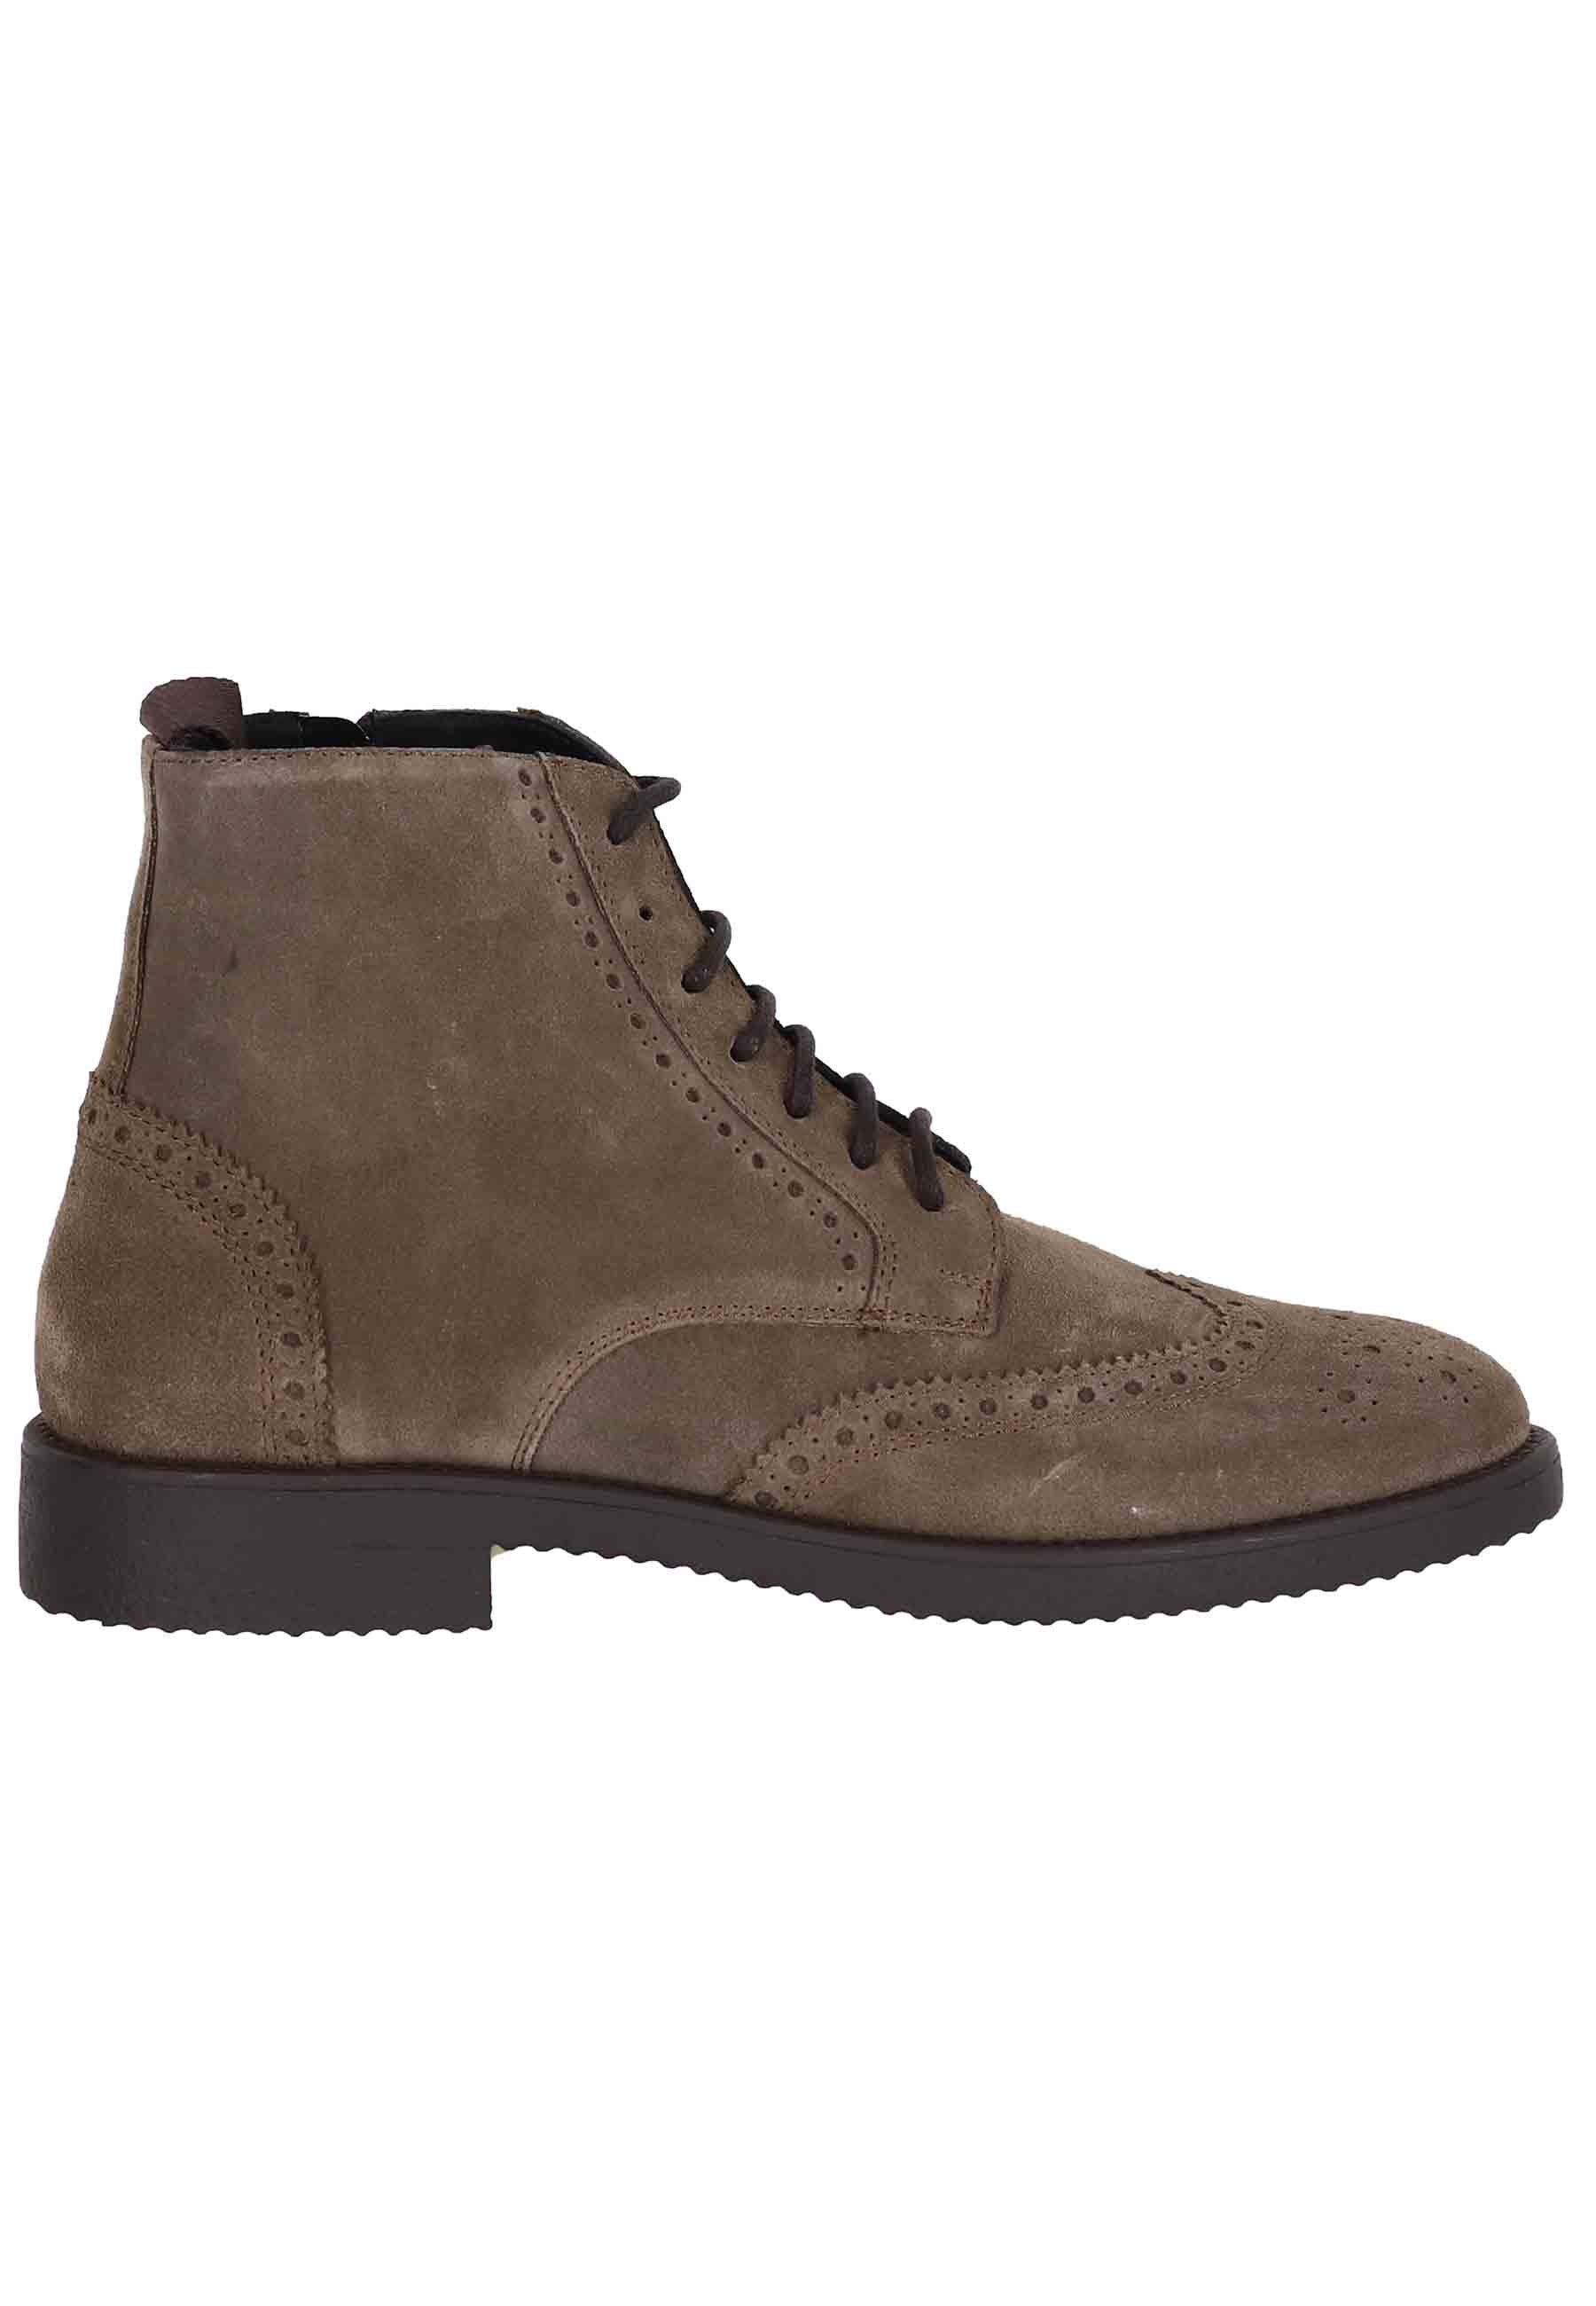 Men's ankle boots in taupe suede with stitching and crepe sole